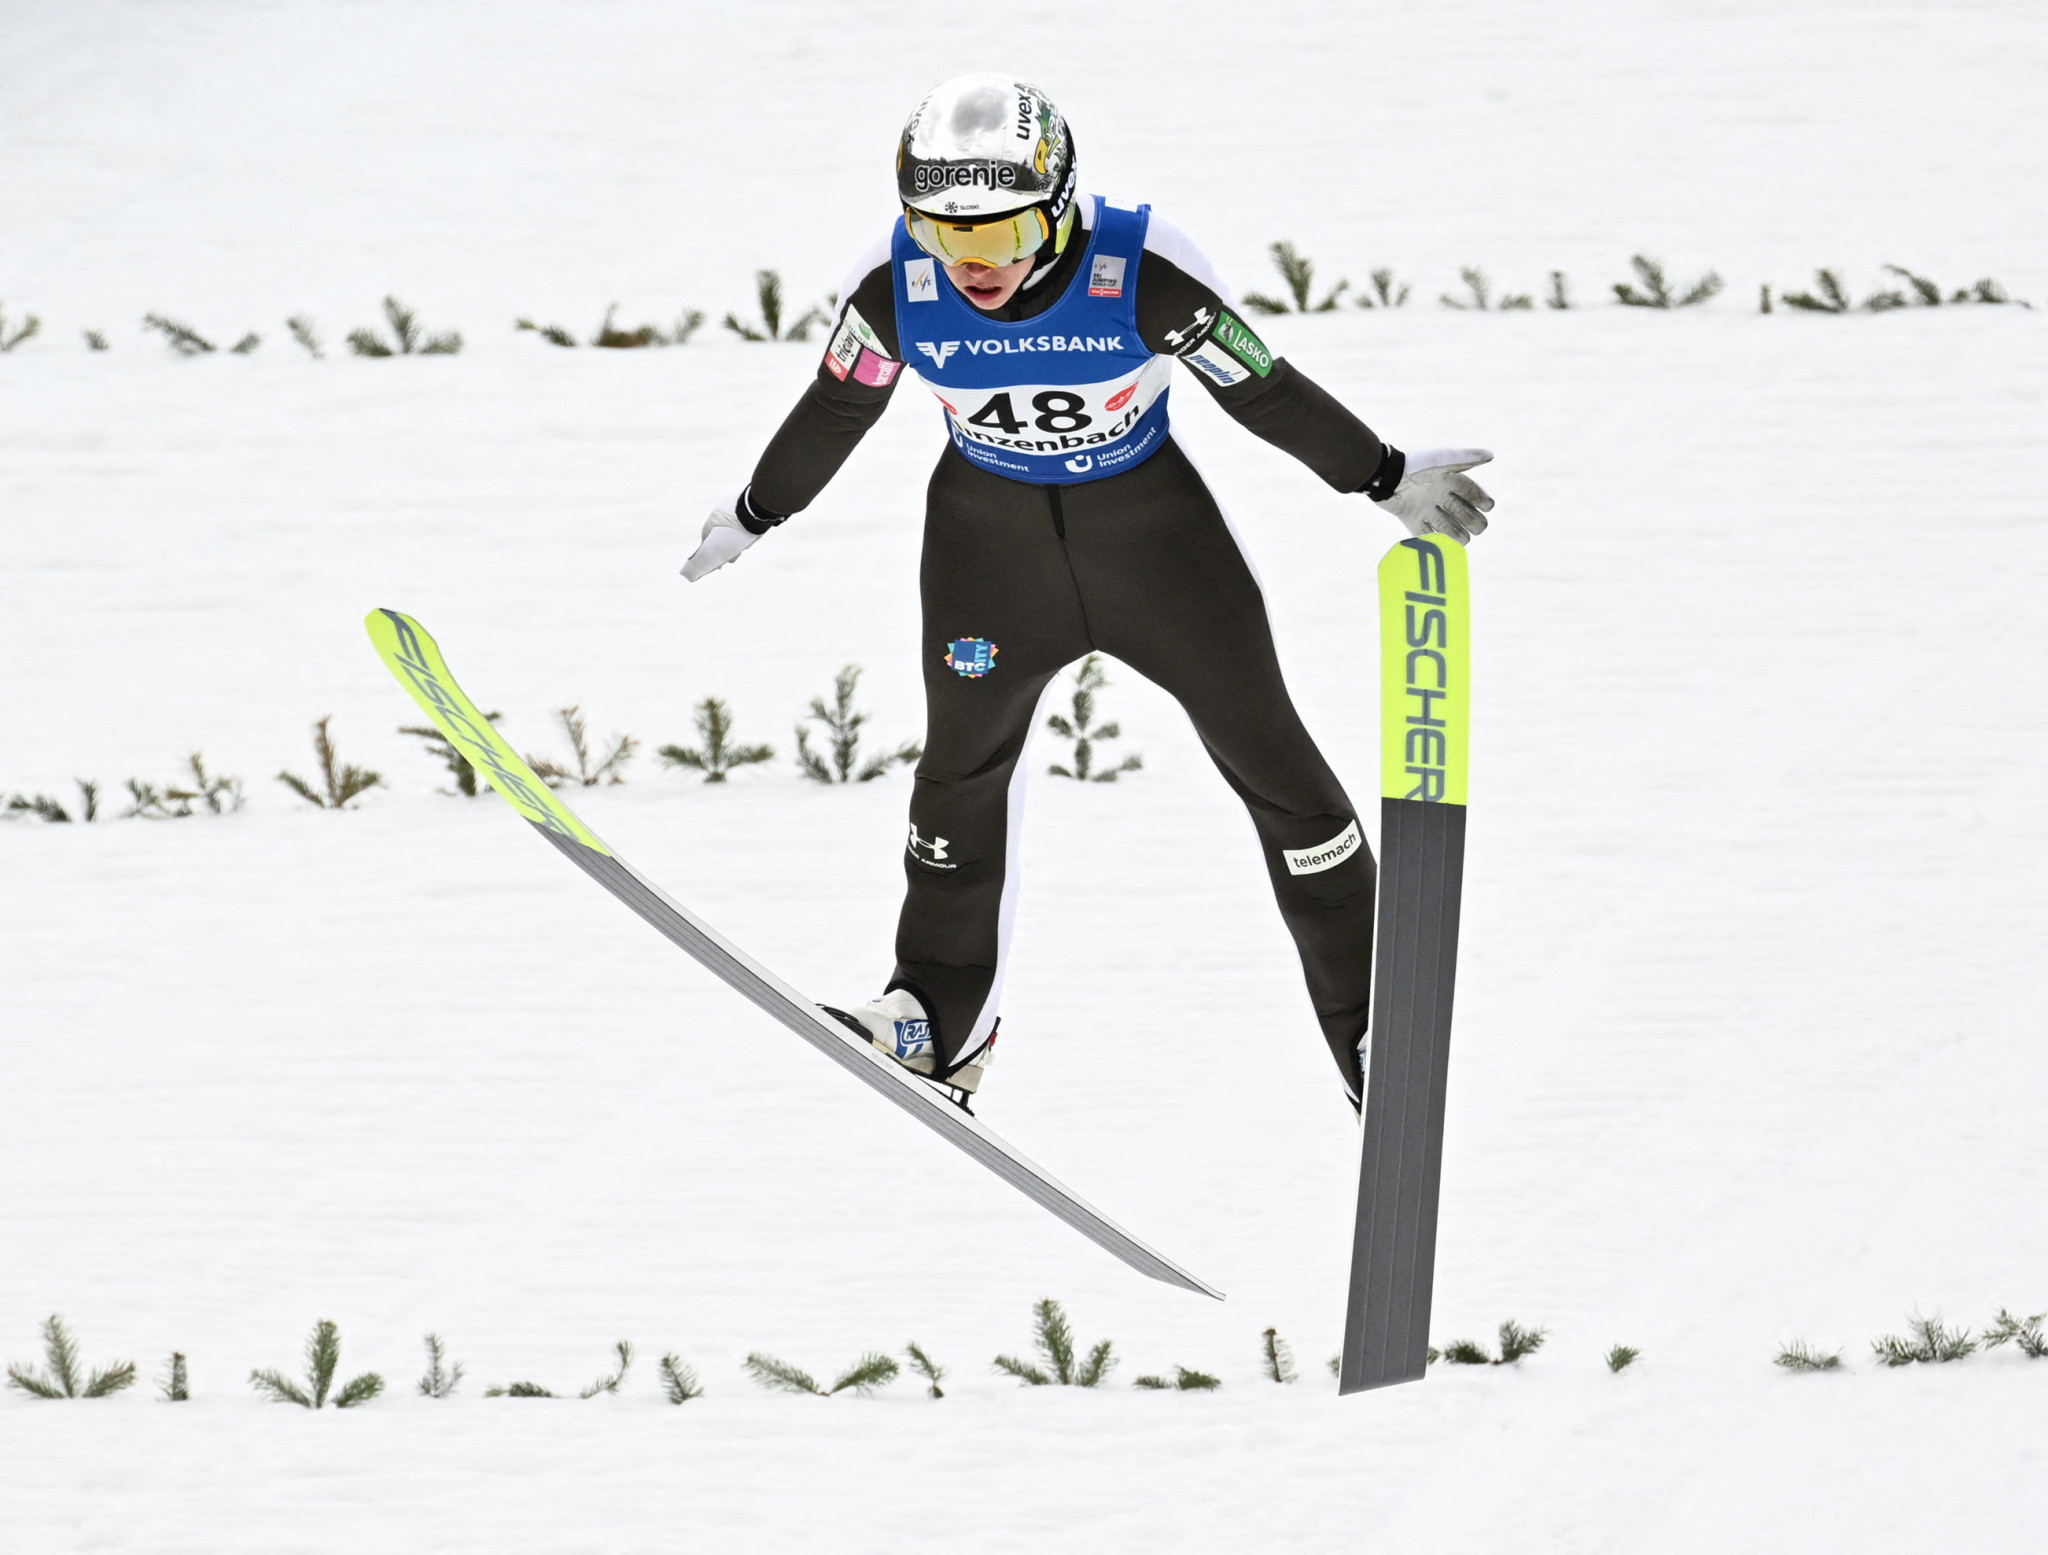 Ursa Bogataj of Slovenia claimed victory at the first of two individual Women's Ski Jumping World Cup competitions in Hinzenbach ©Getty Images